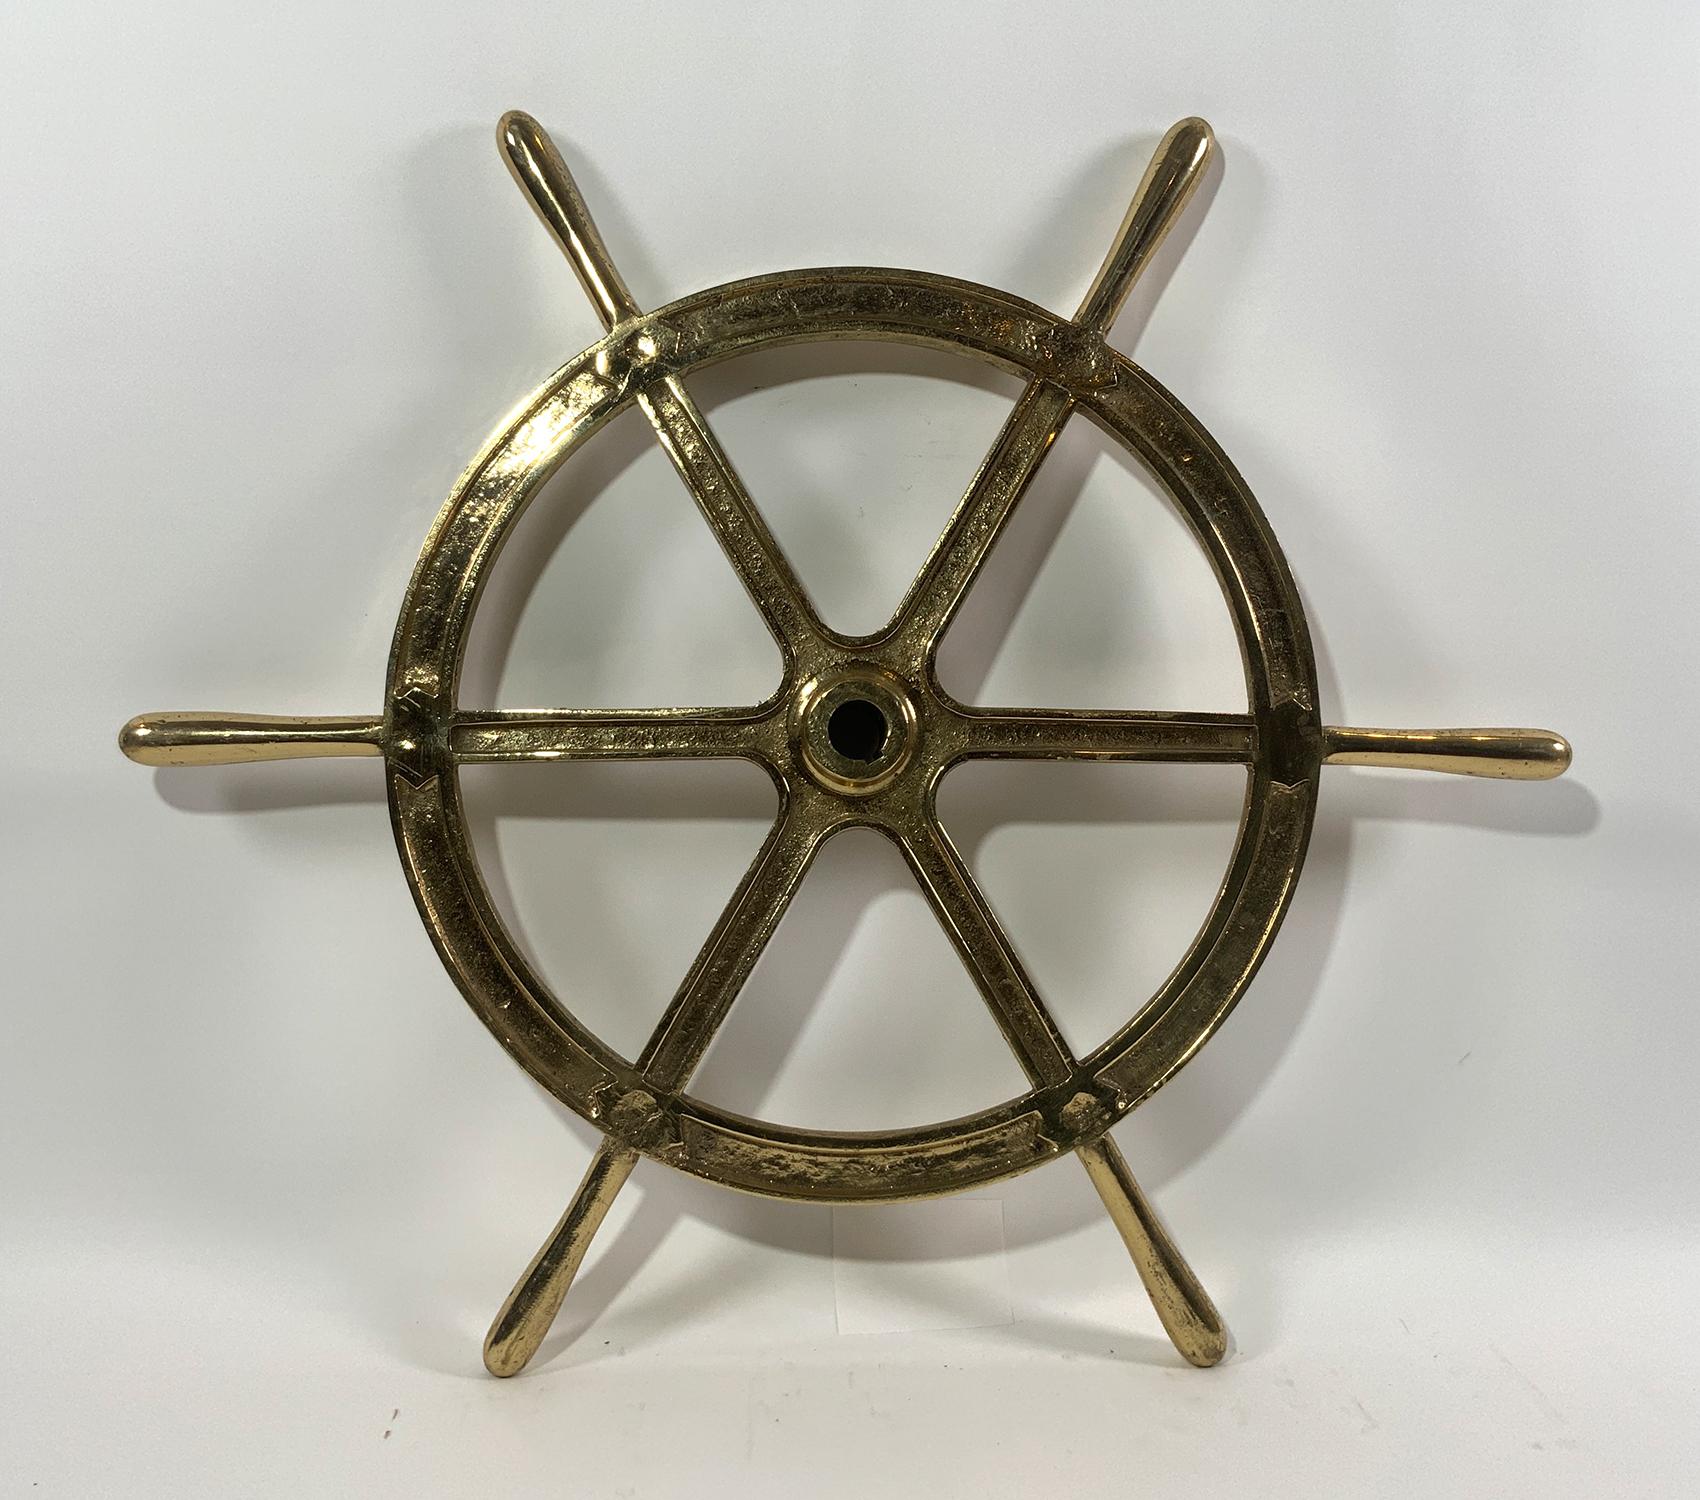 Twenty-eight-inch solid brass six spoke ships wheel with lacquer finish. Sizeable hub with keyway.

Weight: 28 LBS
Overall Dimensions: 28